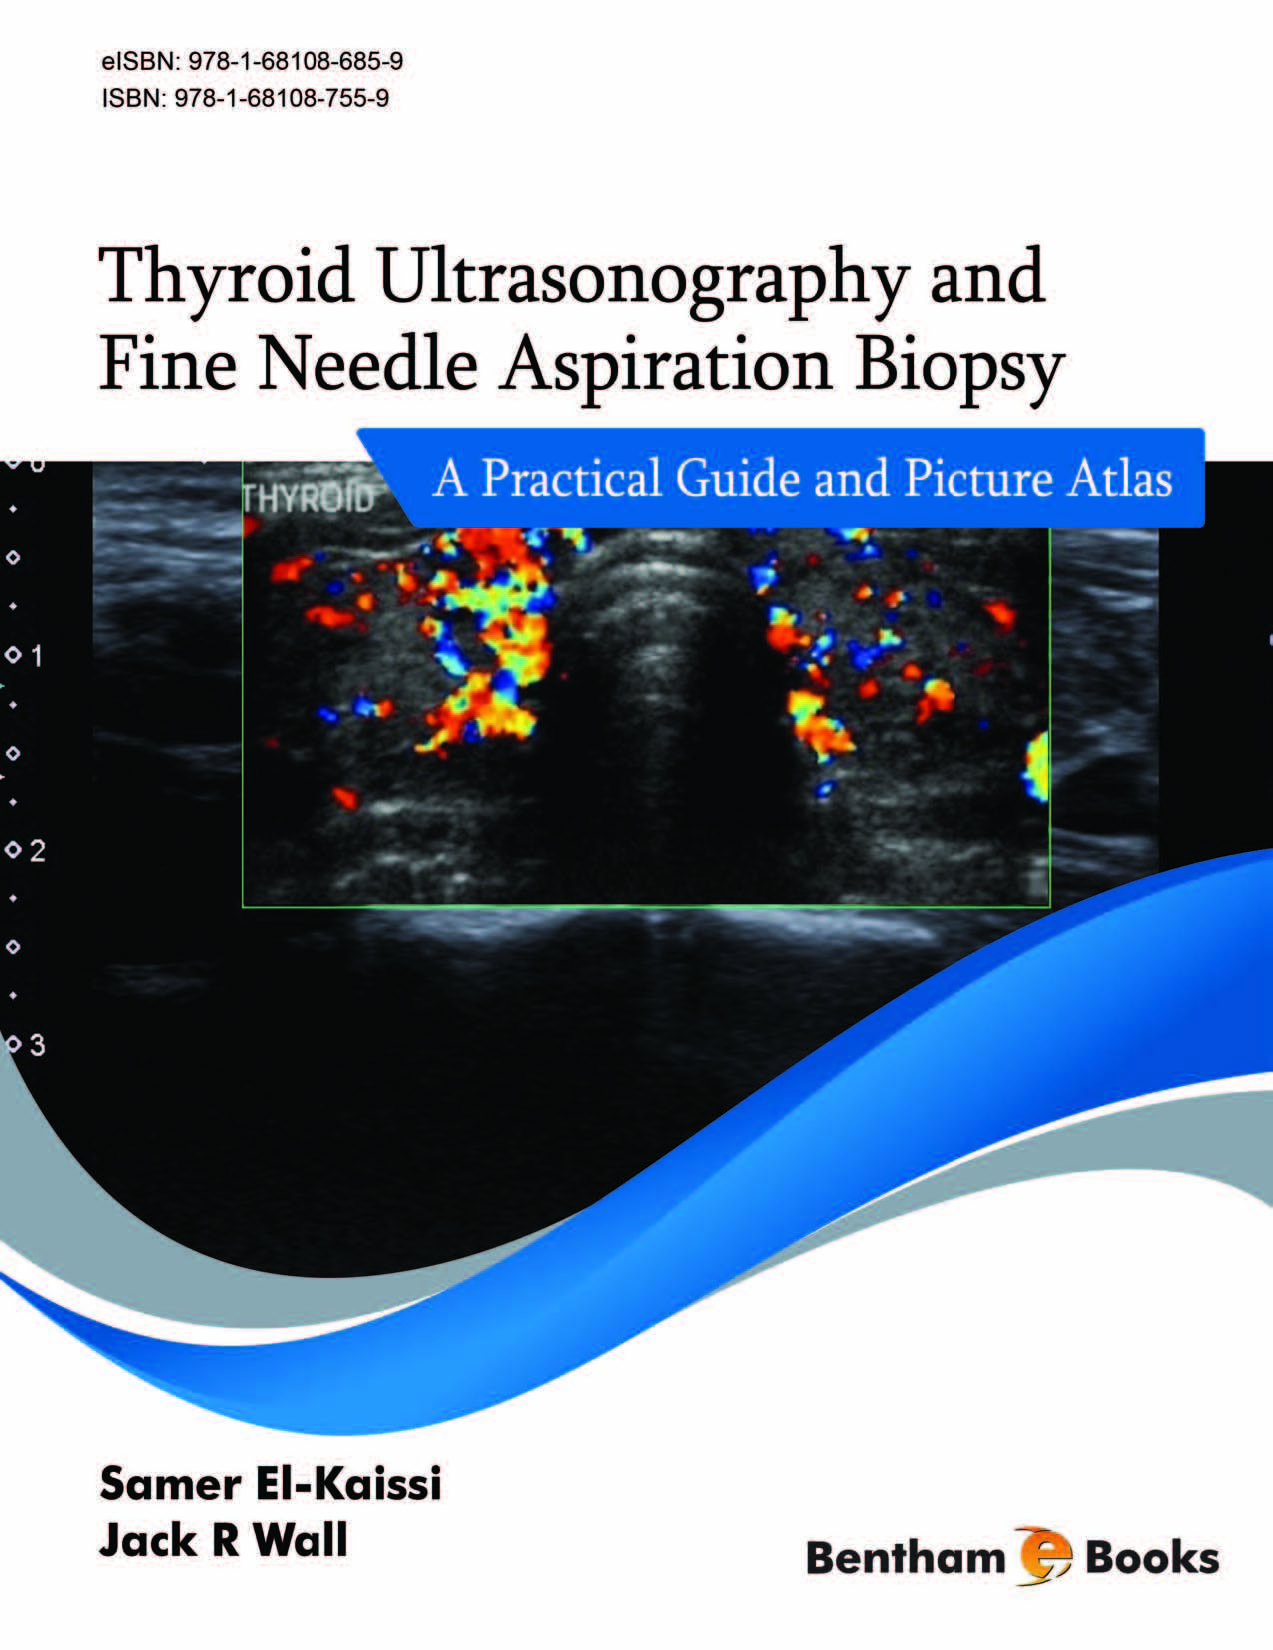 Thyroid Ultrasonography and Fine Needle Aspiration Biopsy: A Practical Guide and Picture Atlas